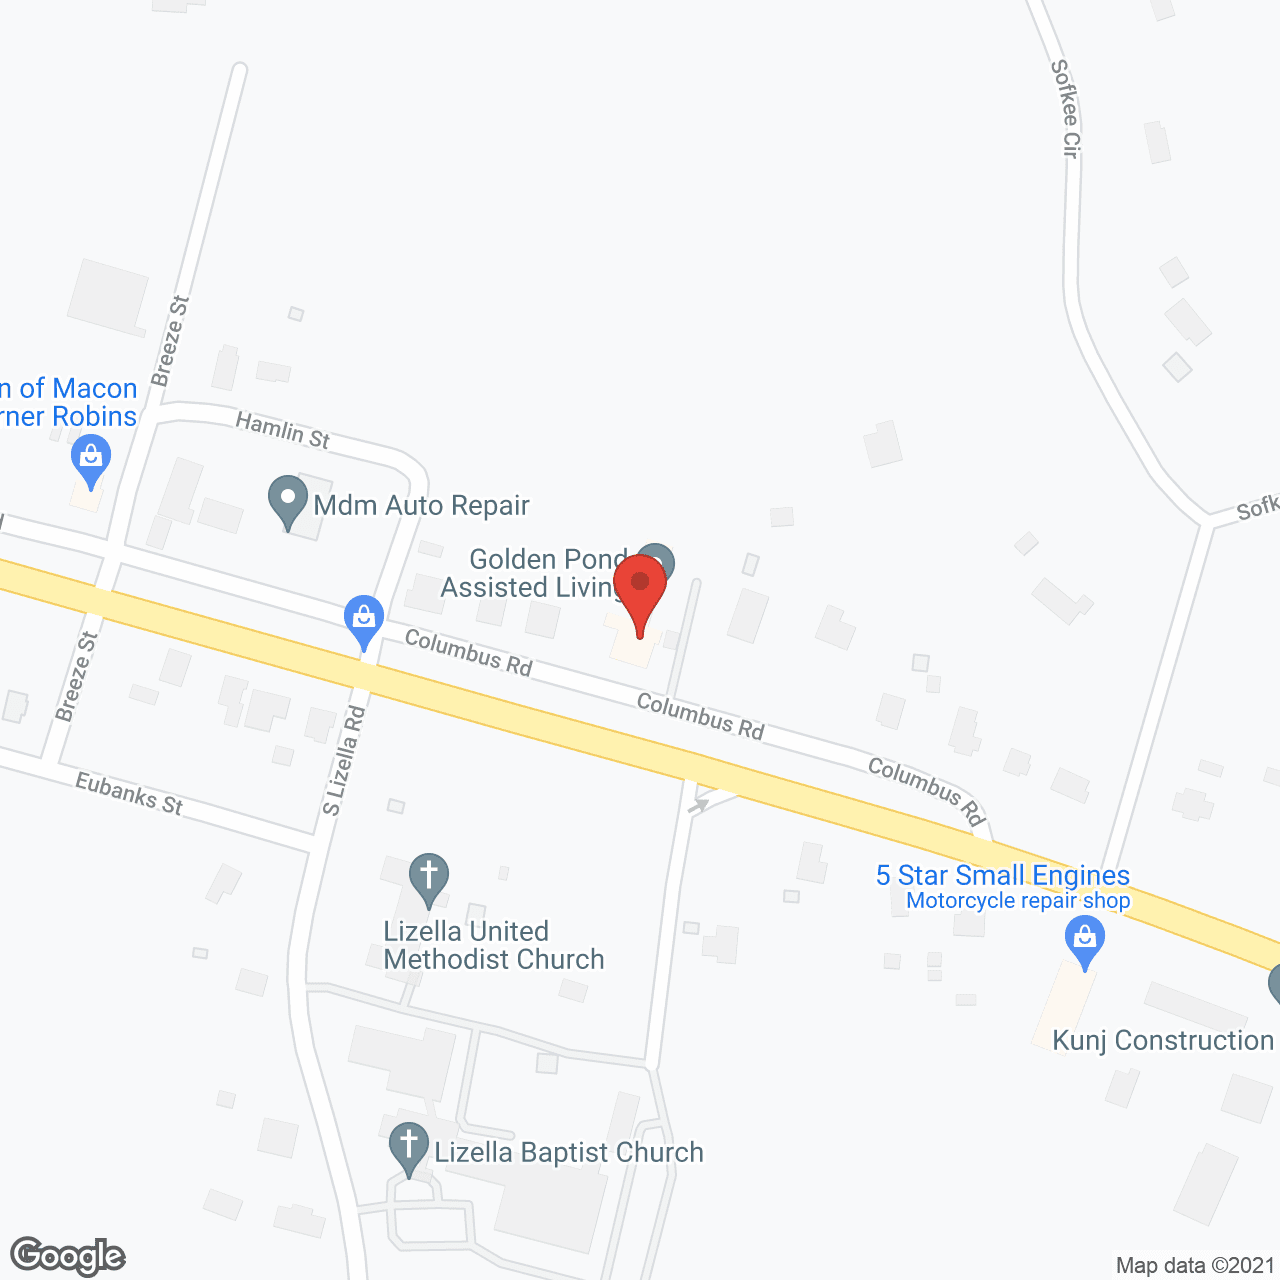 Golden Pond Assisted Living Inc. in google map